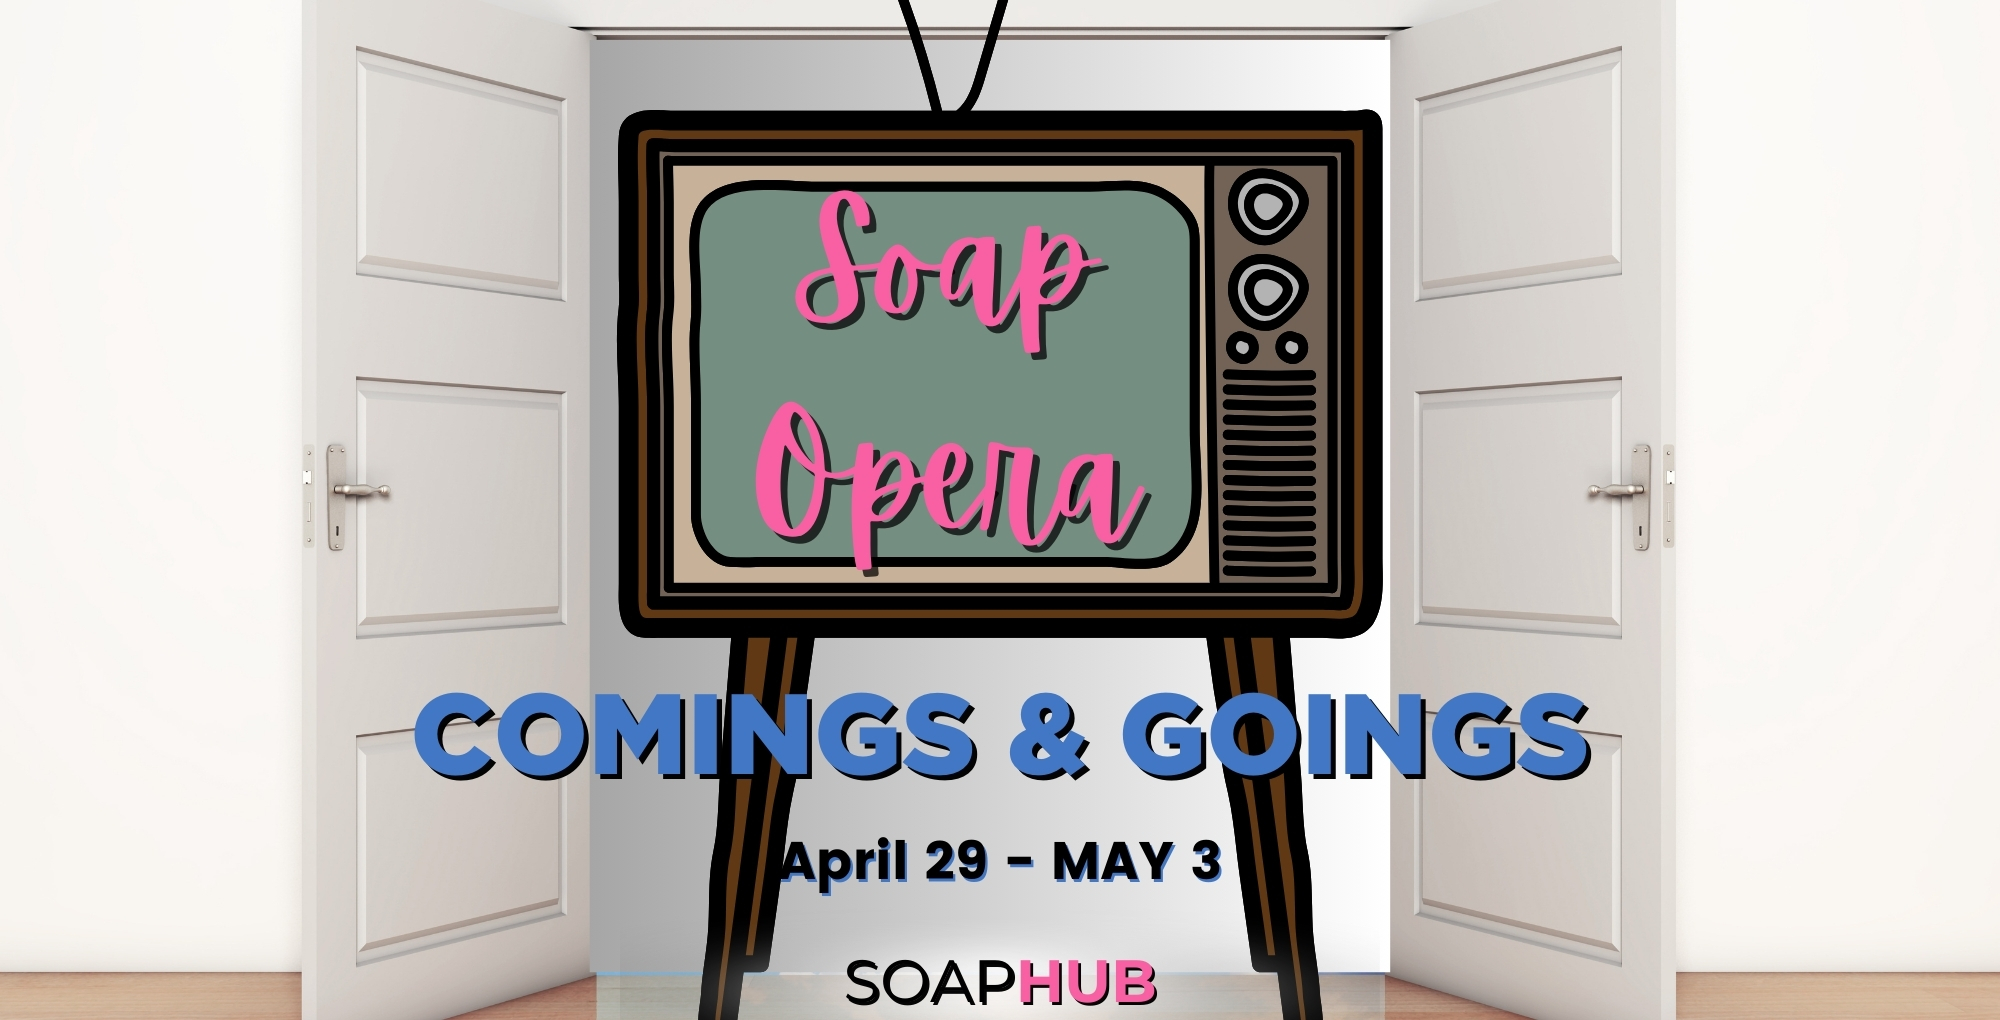 Soap Opera comings and goings for April 29 - May 3 with the Soap Hub logo.